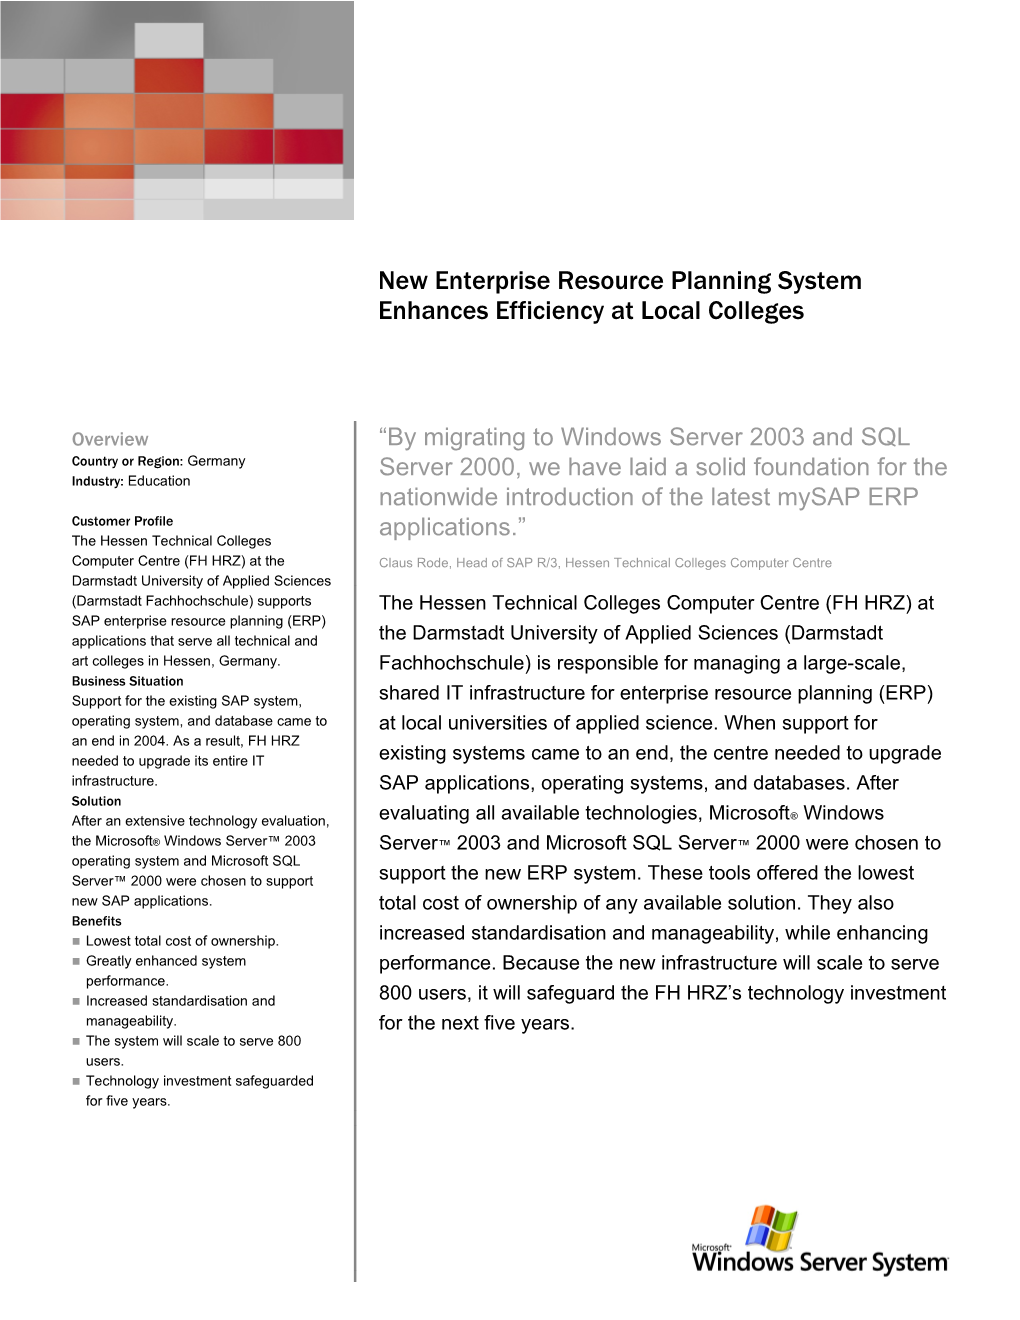 New Enterprise Resource Planning System Enhances Efficiency at Local Colleges